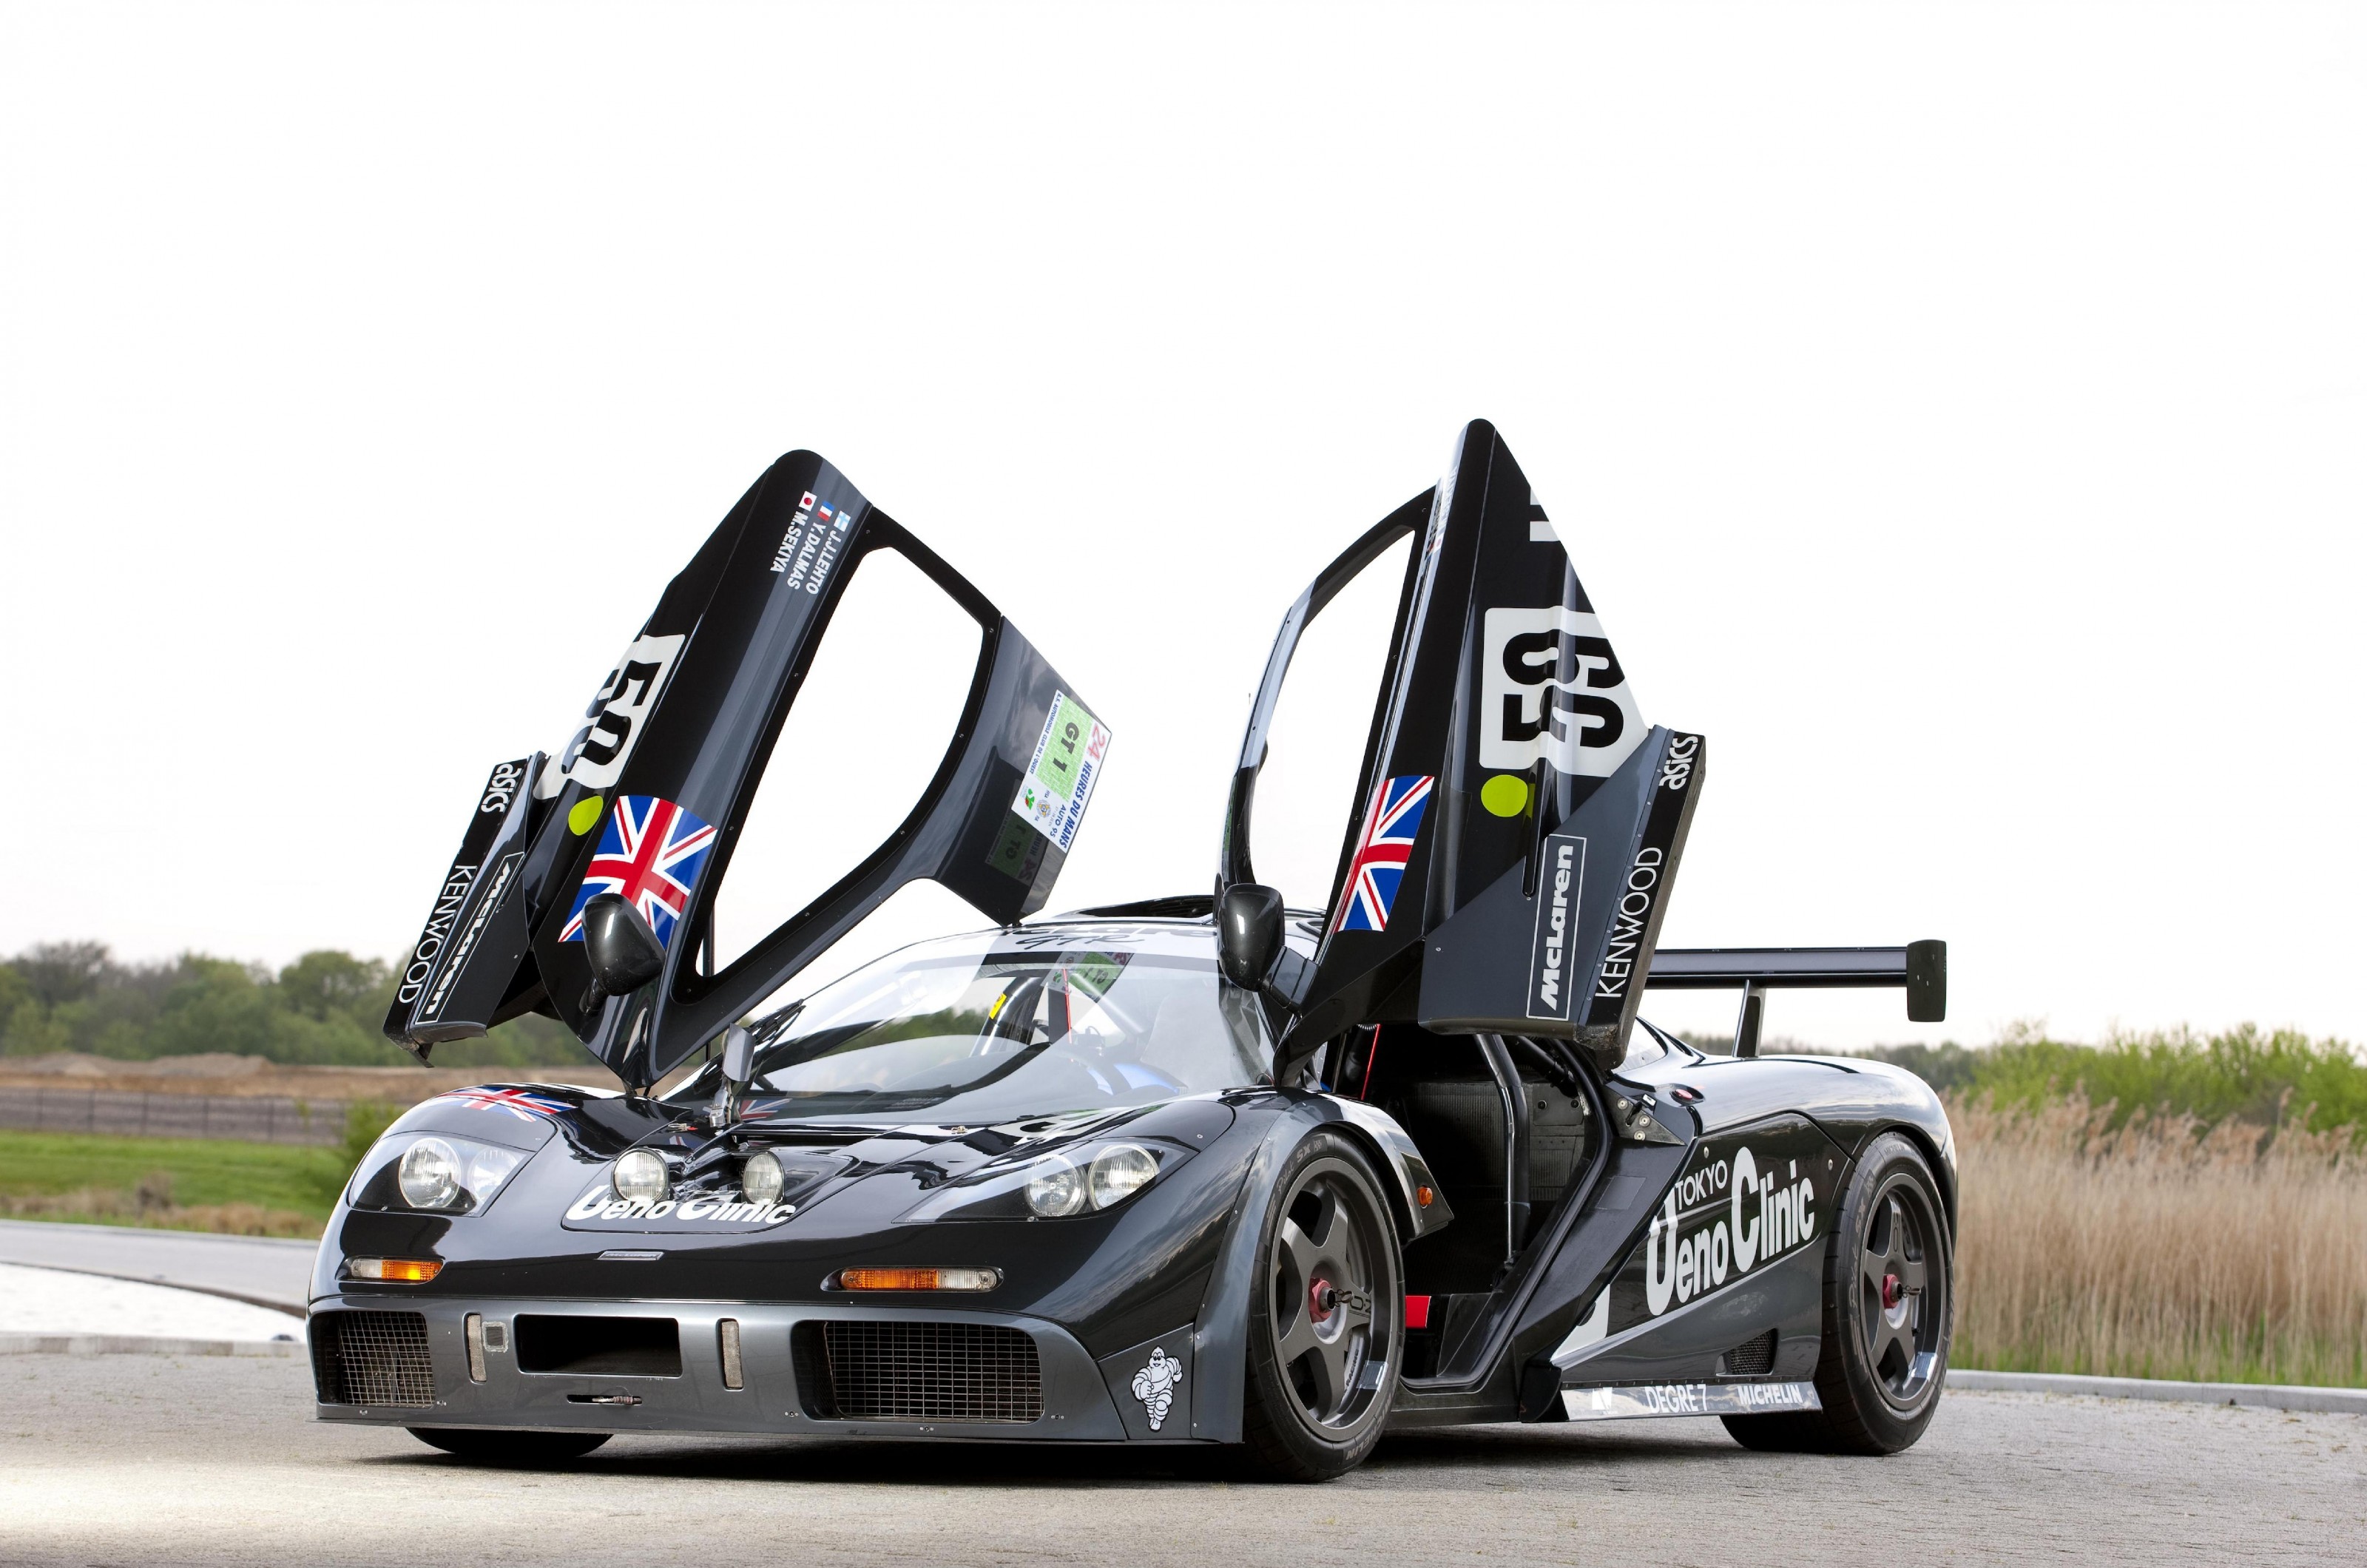 <p>Inspired by the Toyota Sera, the McLaren F1 brought butterfly doors into the mainstream. The story goes that Gordon Murray drove past a Sera everyday and couldn’t shake the idea that these doors would be the right solution for the F1.</p>  <p>Focused on making the car perfectly balanced, the central seat posed a challenge for traditional doors. Unless the designer was content with the driver having to do an undignified shimmy to get out, a side-opening door would not do.</p>  <p>The Sera’s doors meant there was a portion of roof removed at the same time as the door opening, making it far easier for the driver to climb out. Murray borrowed a Sera to study the mechanism and eventually, with the help of Bruce Mackintosh, mocked up the door design that would go on to be an iconic facet of the McLaren F1, far surpassing its inspiration’s status.</p>